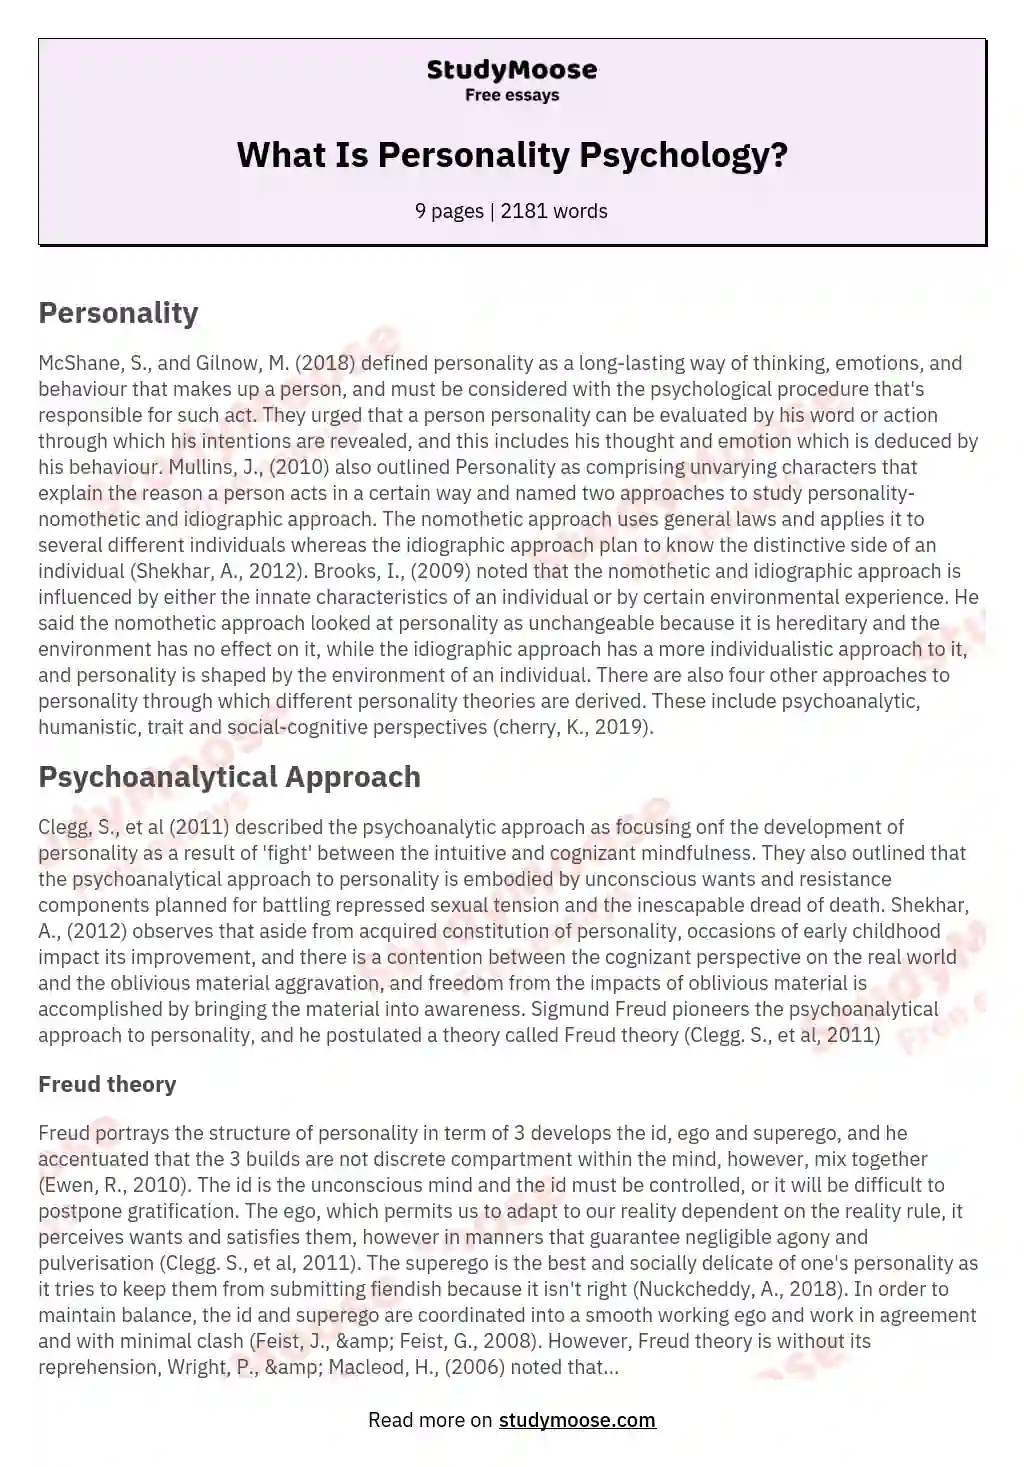 What Is Personality Psychology? essay